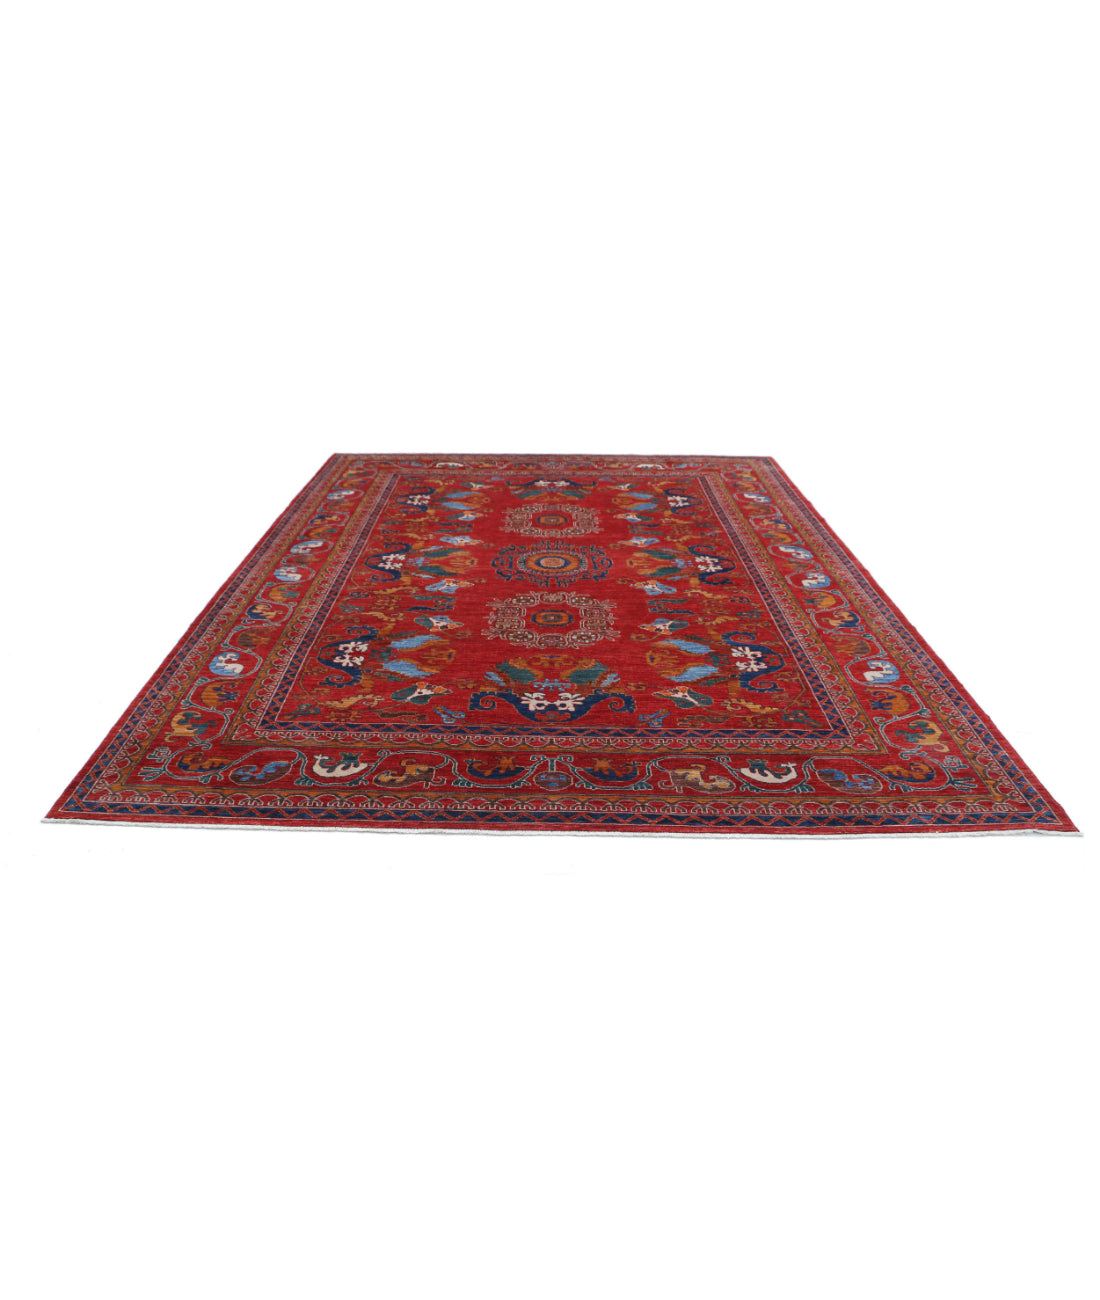 Hand Knotted Nomadic Caucasian Humna Wool Rug - 9'2'' x 11'9'' 9'2'' x 11'9'' (275 X 353) / Red / Blue